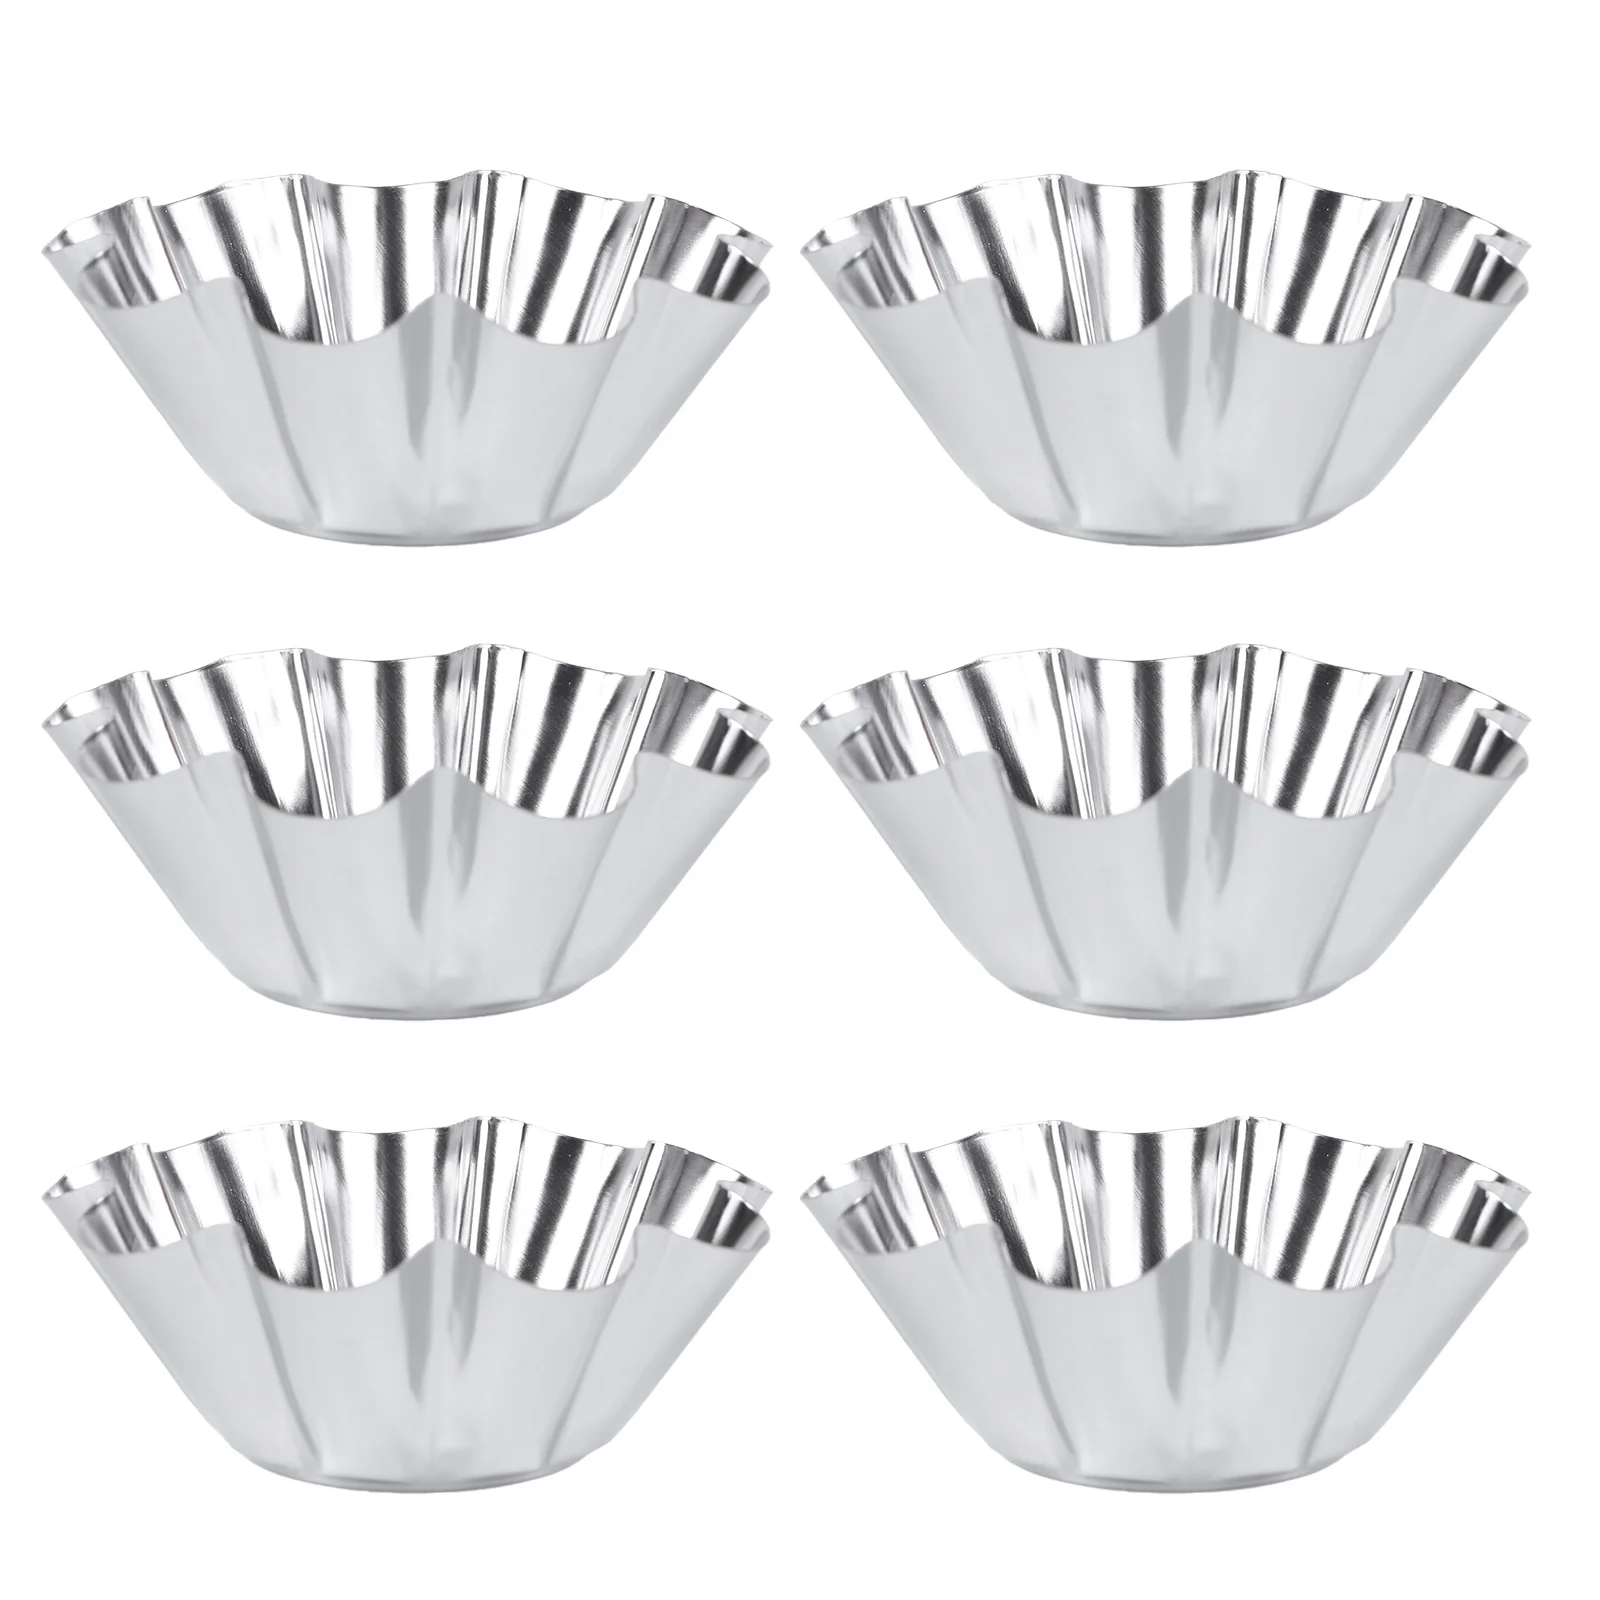 

Tart Muffin Cup Non-stick Pans Stainless Steel Mold Flower Chocolate Chip Muffins